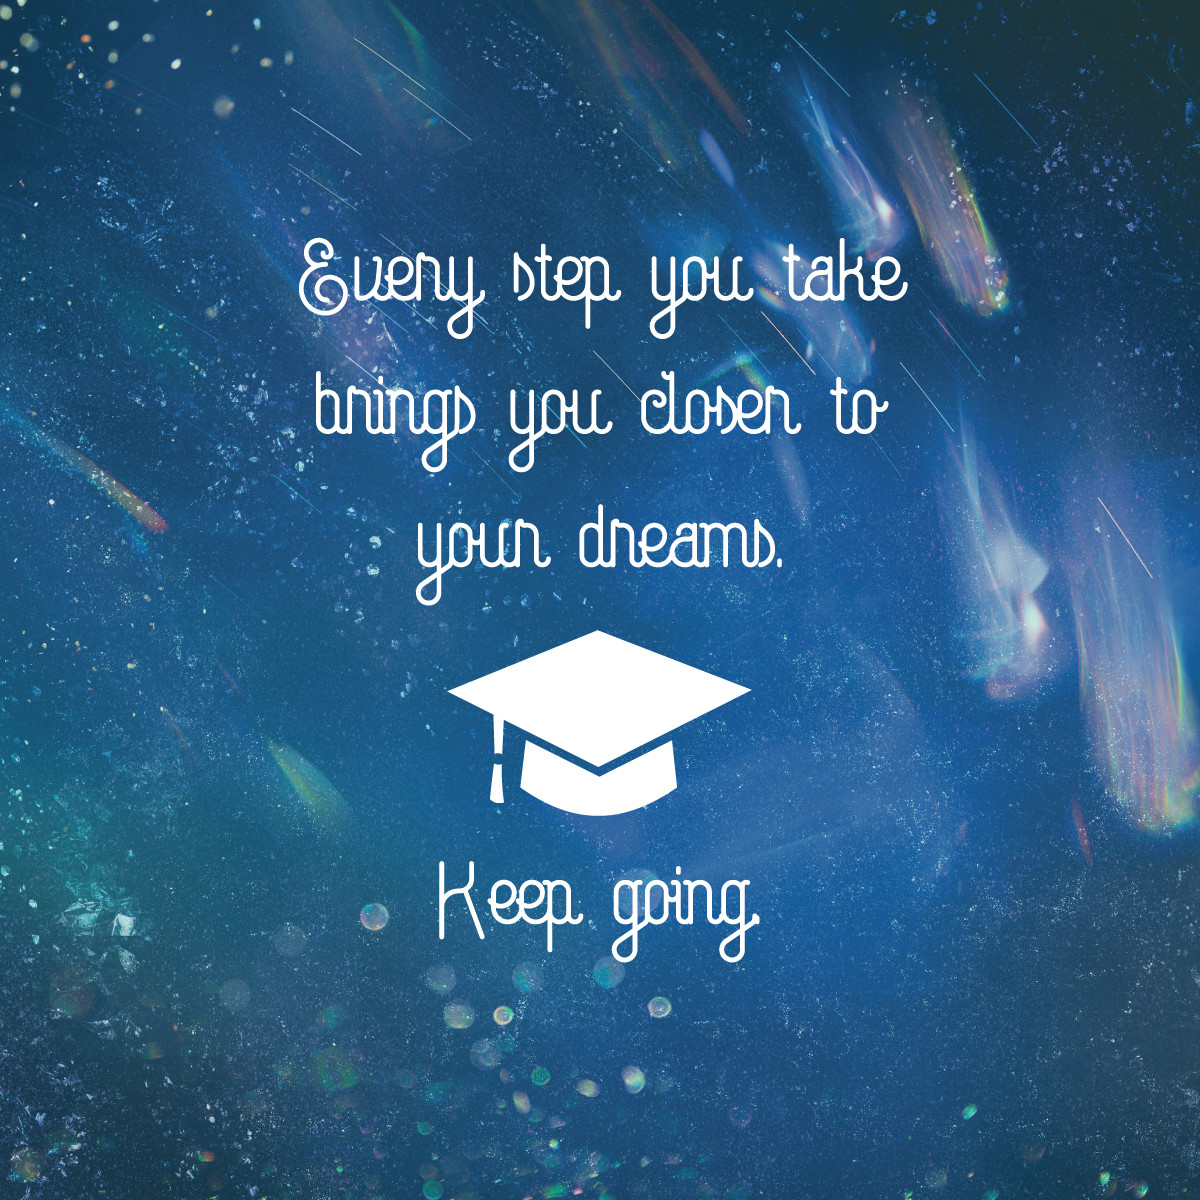 Graduation Congratulations Quotes
 Congrats to all those graduating this month